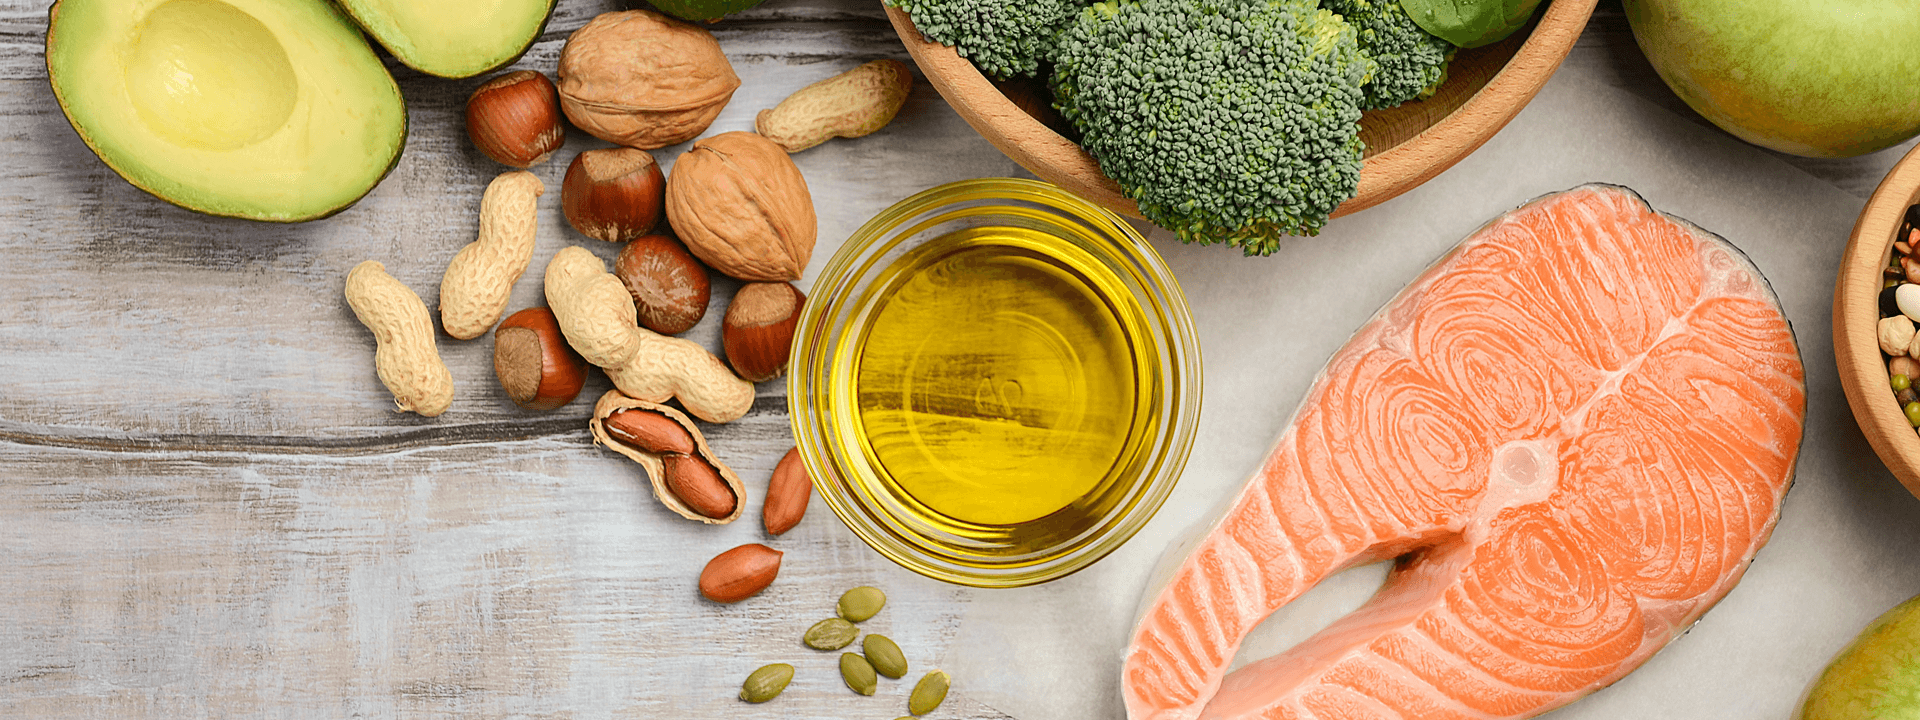 Improved diabetic kidney health with Omega 3?